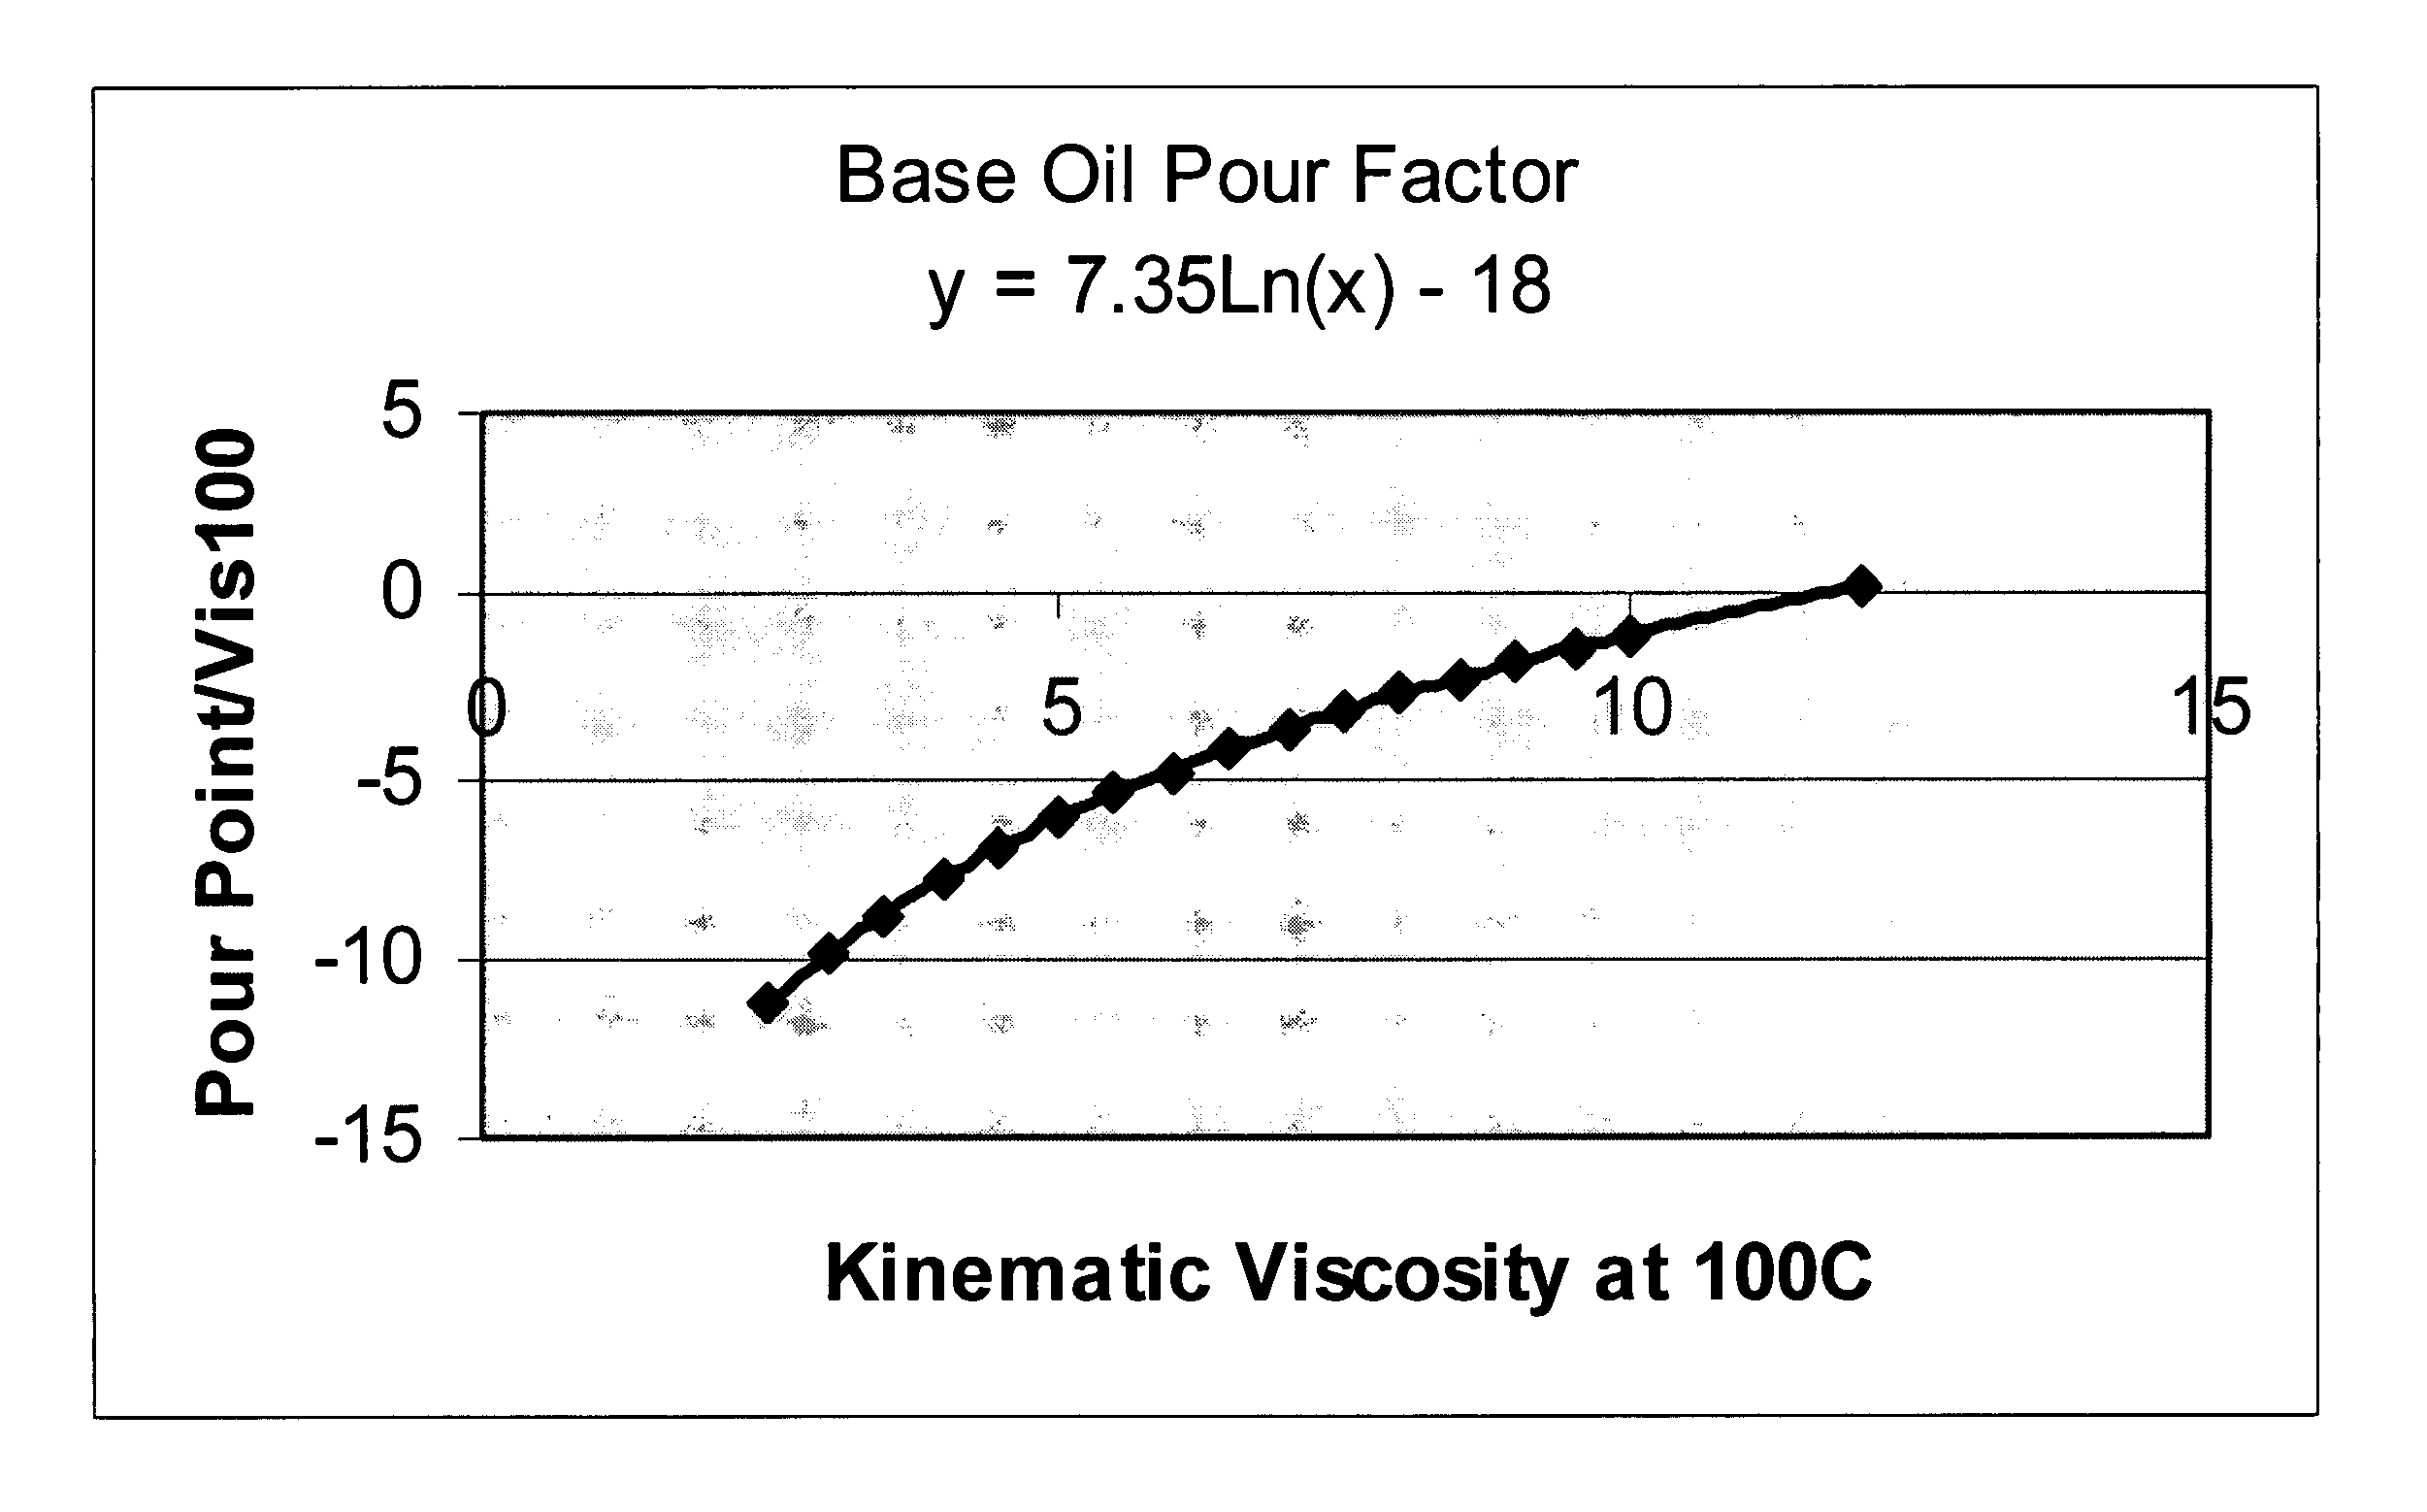 Composition of lubricating base oil with high monocycloparaffins and low multicycloparaffins